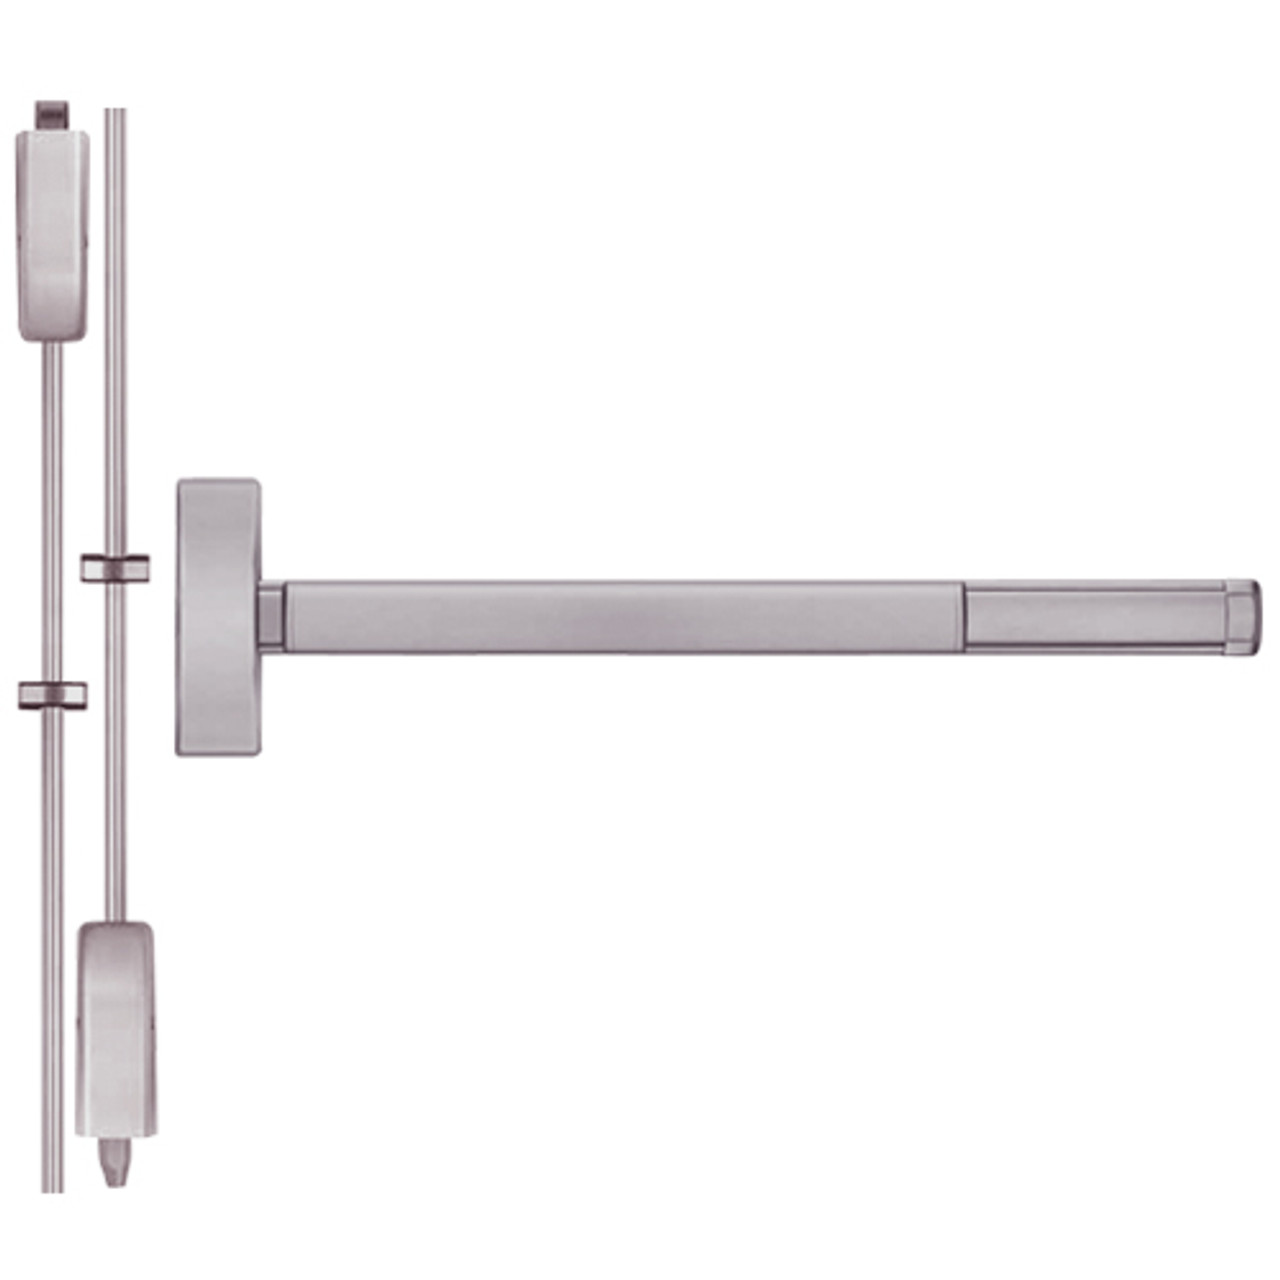 TS2203-630-48 PHI 2200 Series Non Fire Rated Apex Surface Vertical Rod Device with Touchbar Monitoring Switch Prepped for Key Retracts Latchbolt in Satin Stainless Steel Finish